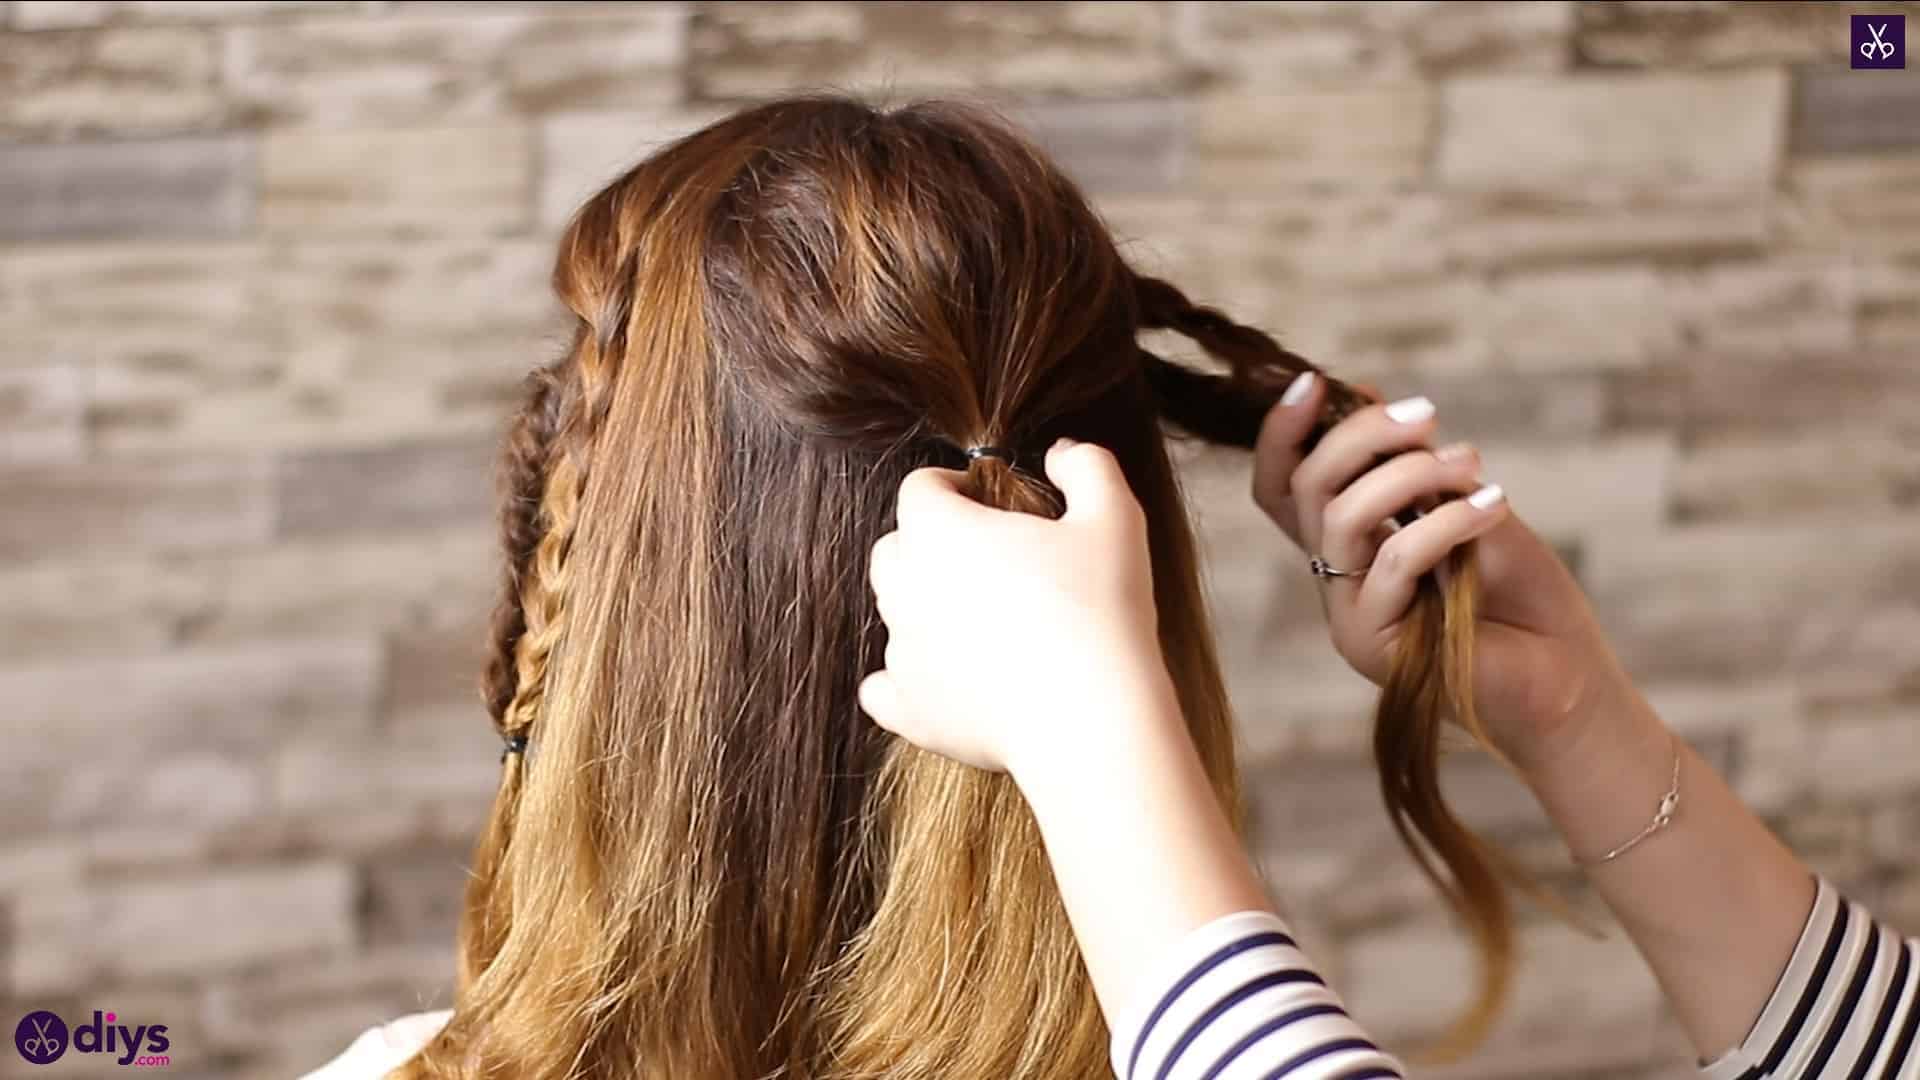 Half up, half down hairstyle for spring45